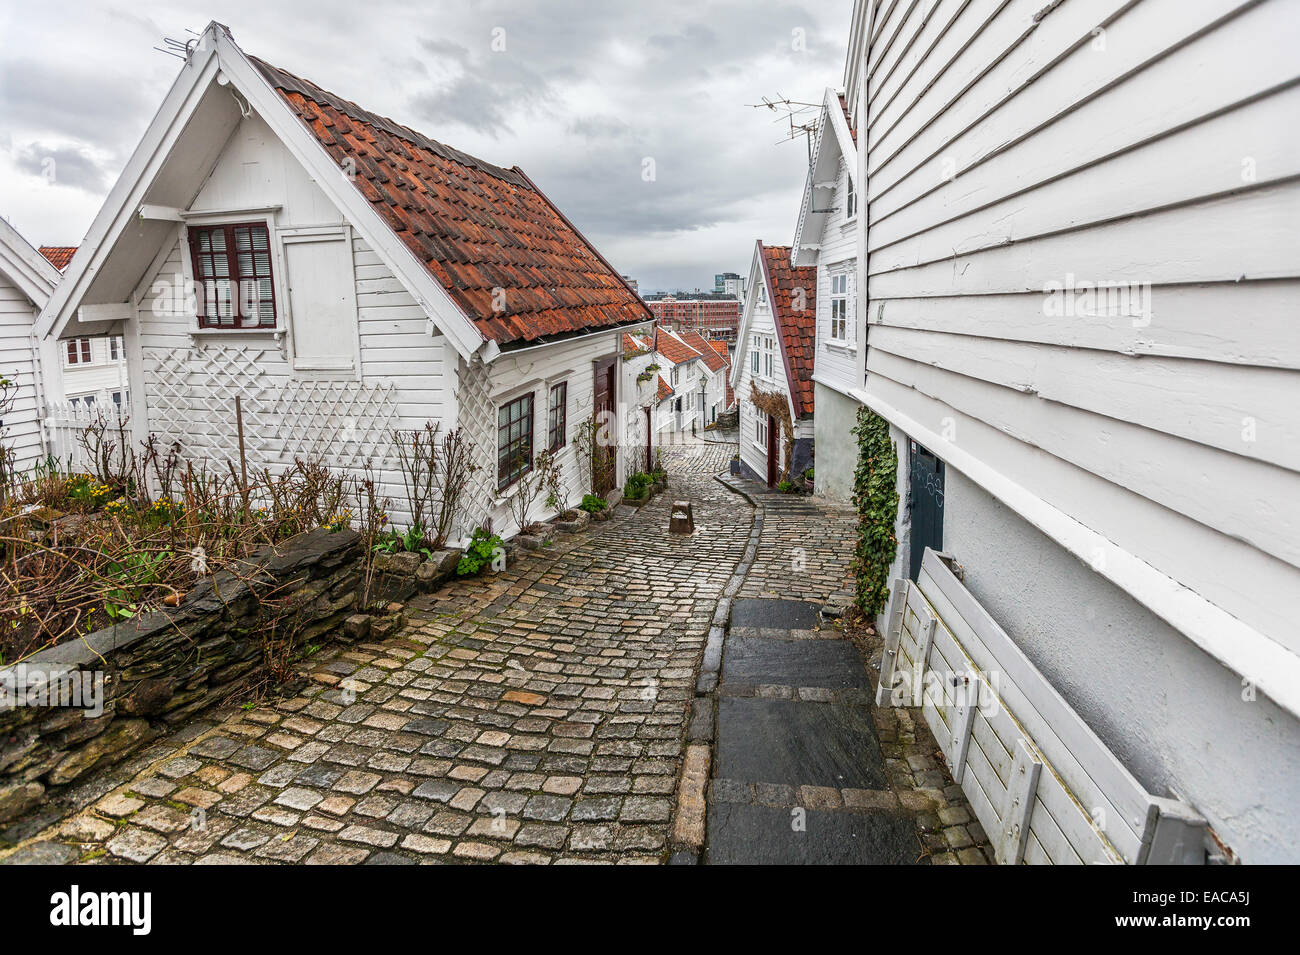 The award winning 18th century fishing village of Old Stavanger in Norway comprising 173 mainly white wooden buildings. Stock Photo